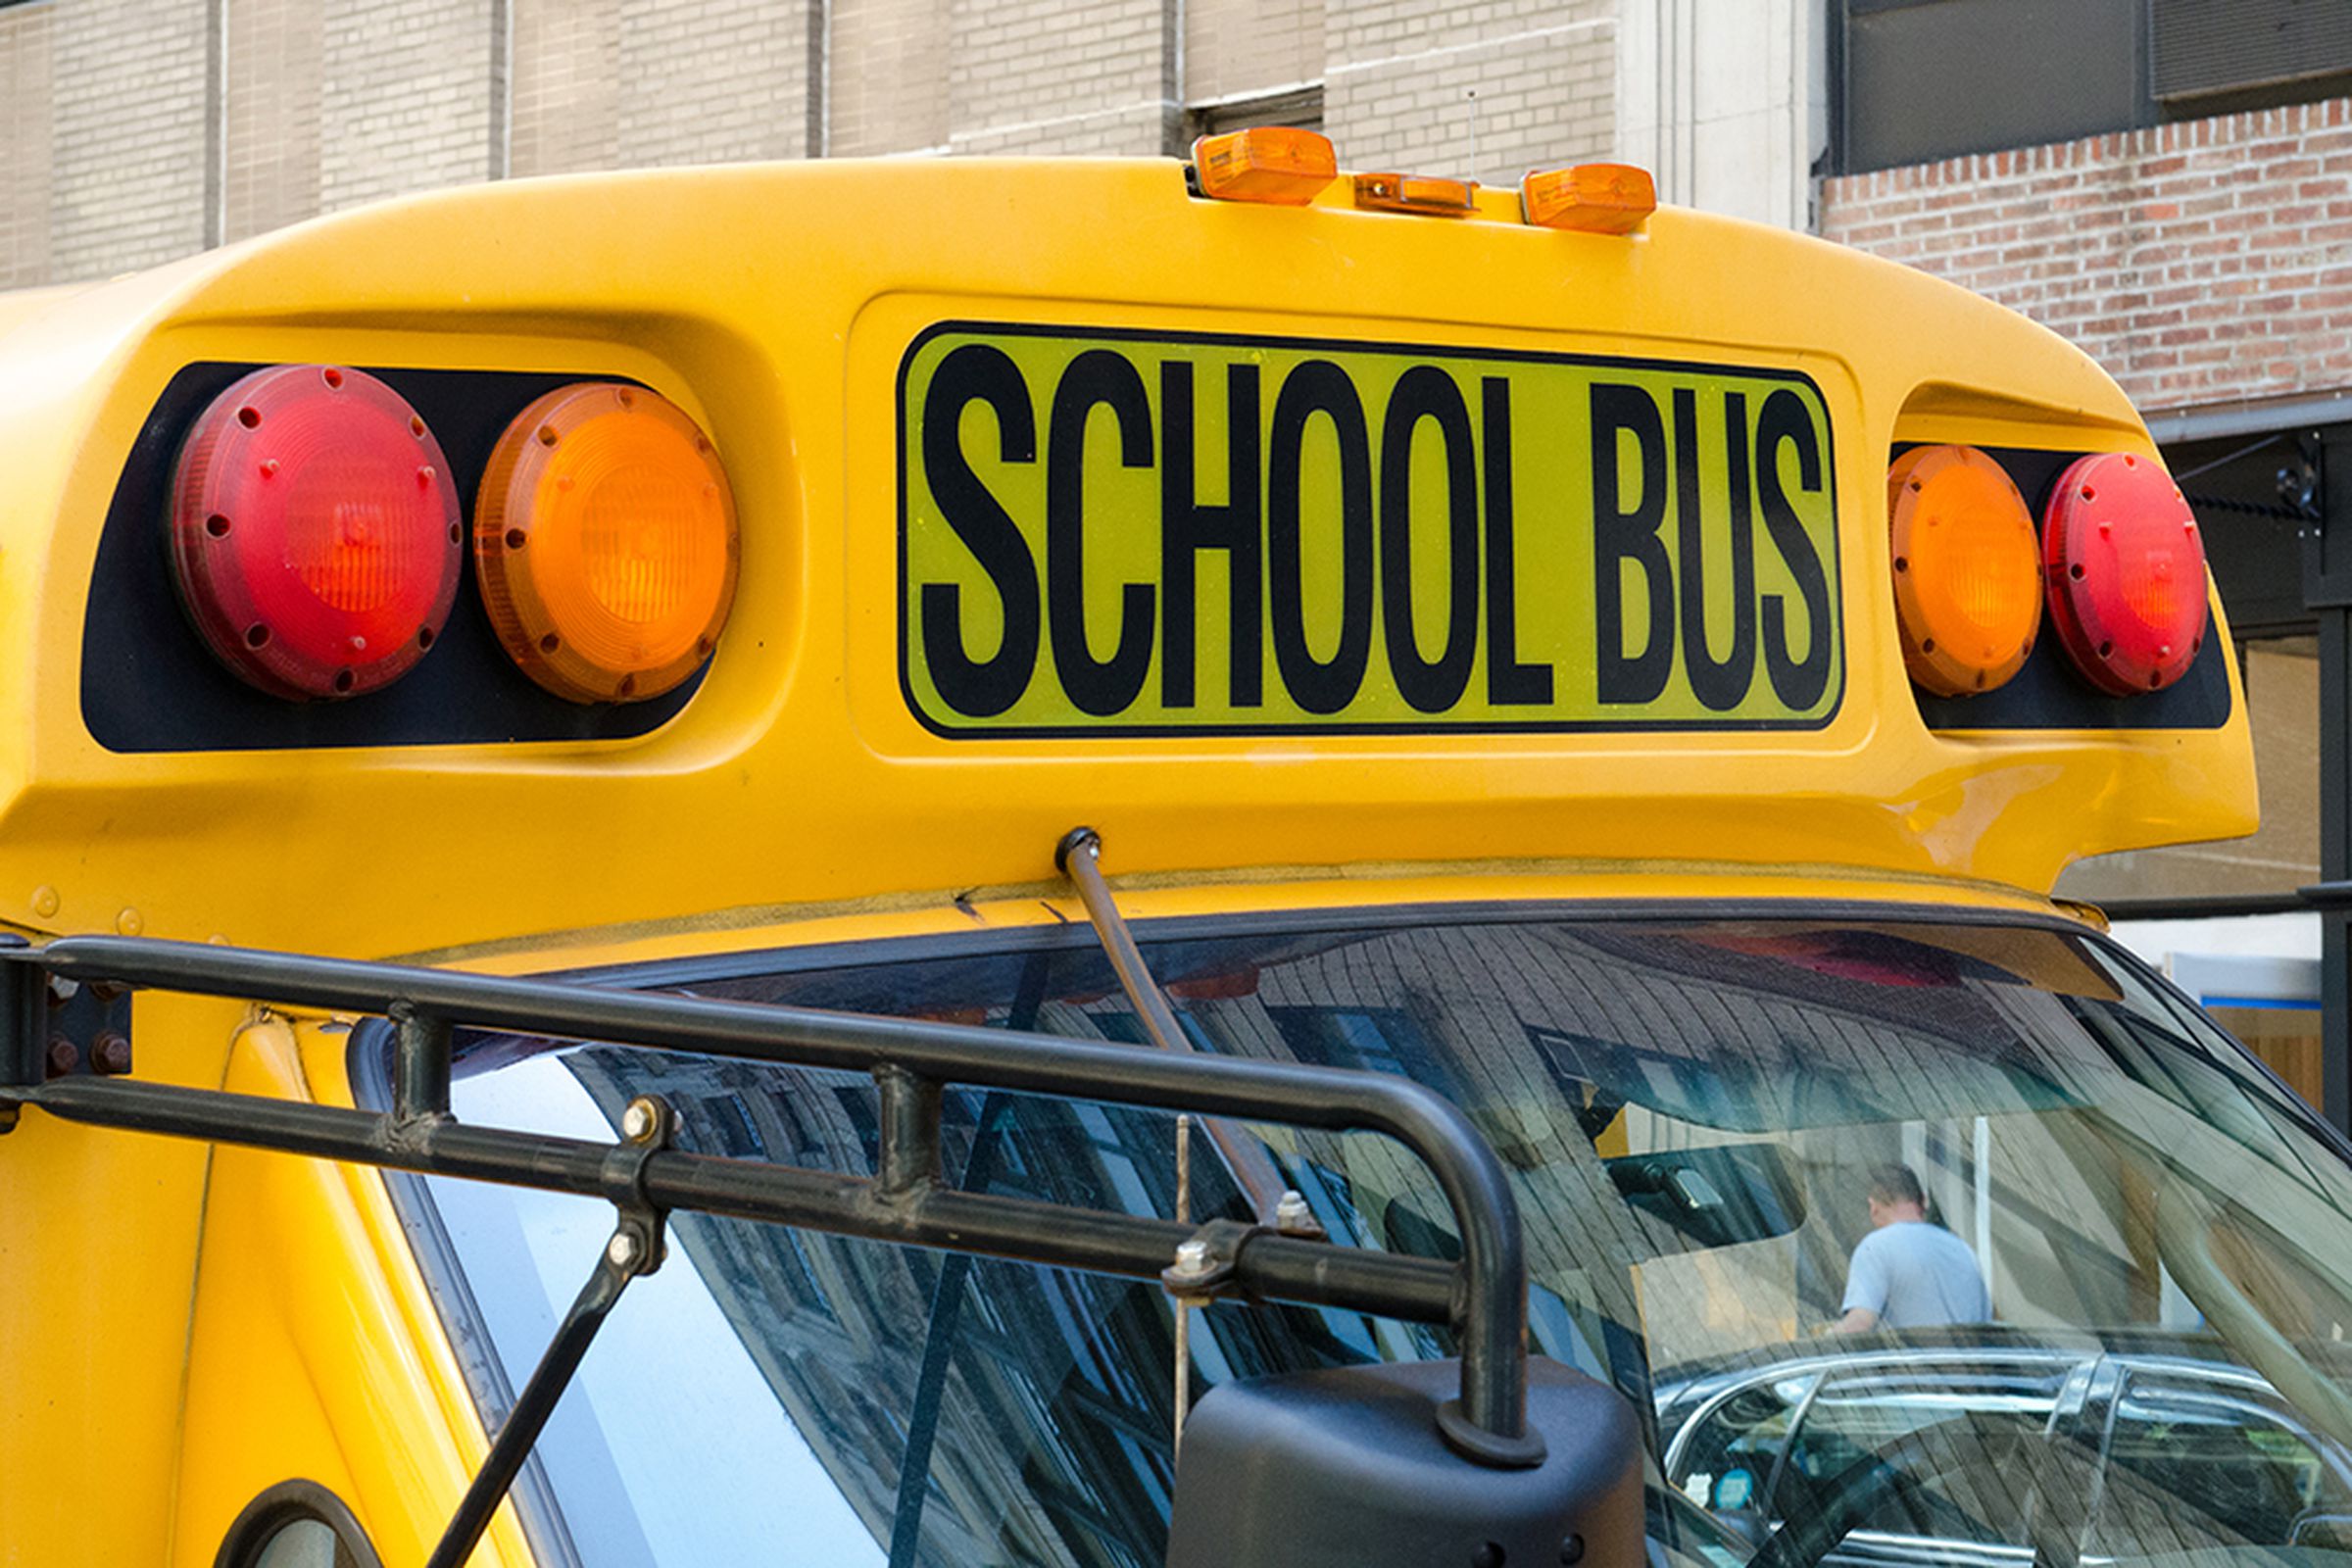 A stock photo of a school bus